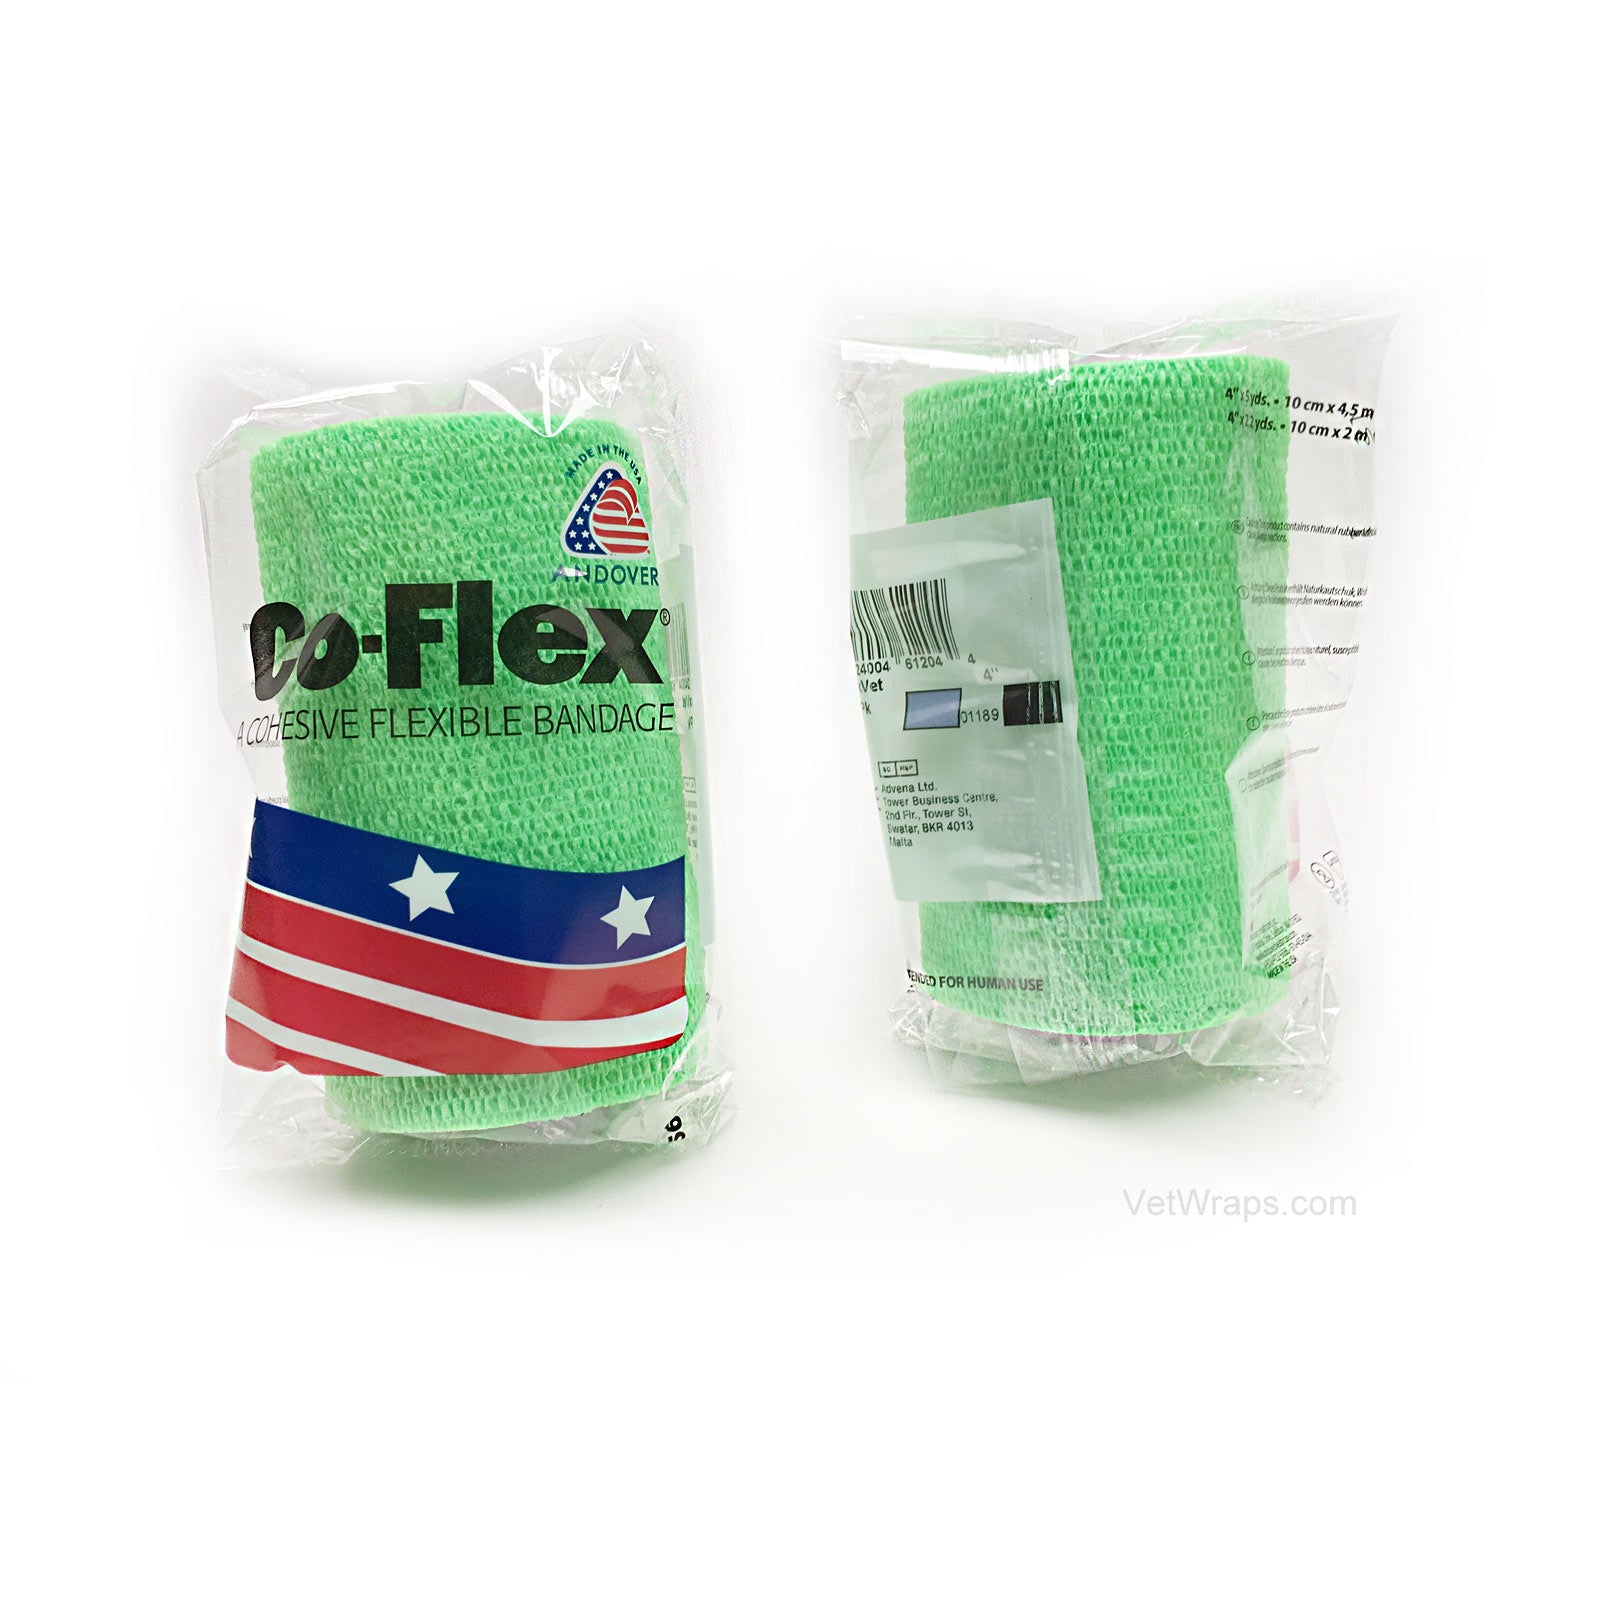 CoFlex Vet Cohesive Bandage Wrap Neon Green Pack 4 Inch Packaged Rolls